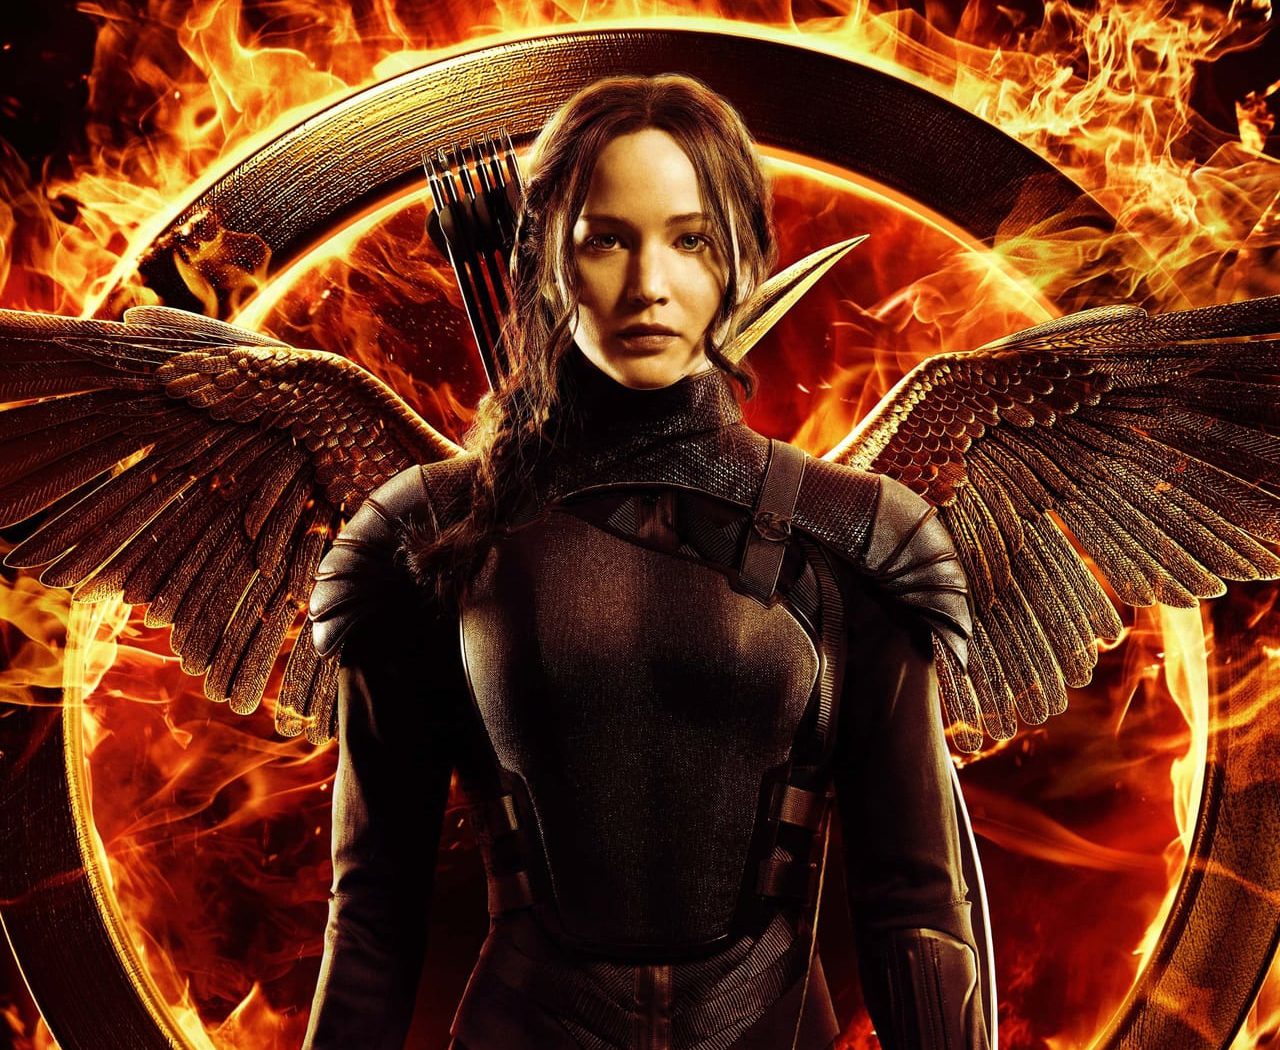 Poster for the movie "The Hunger Games: Mockingjay - Part 1"